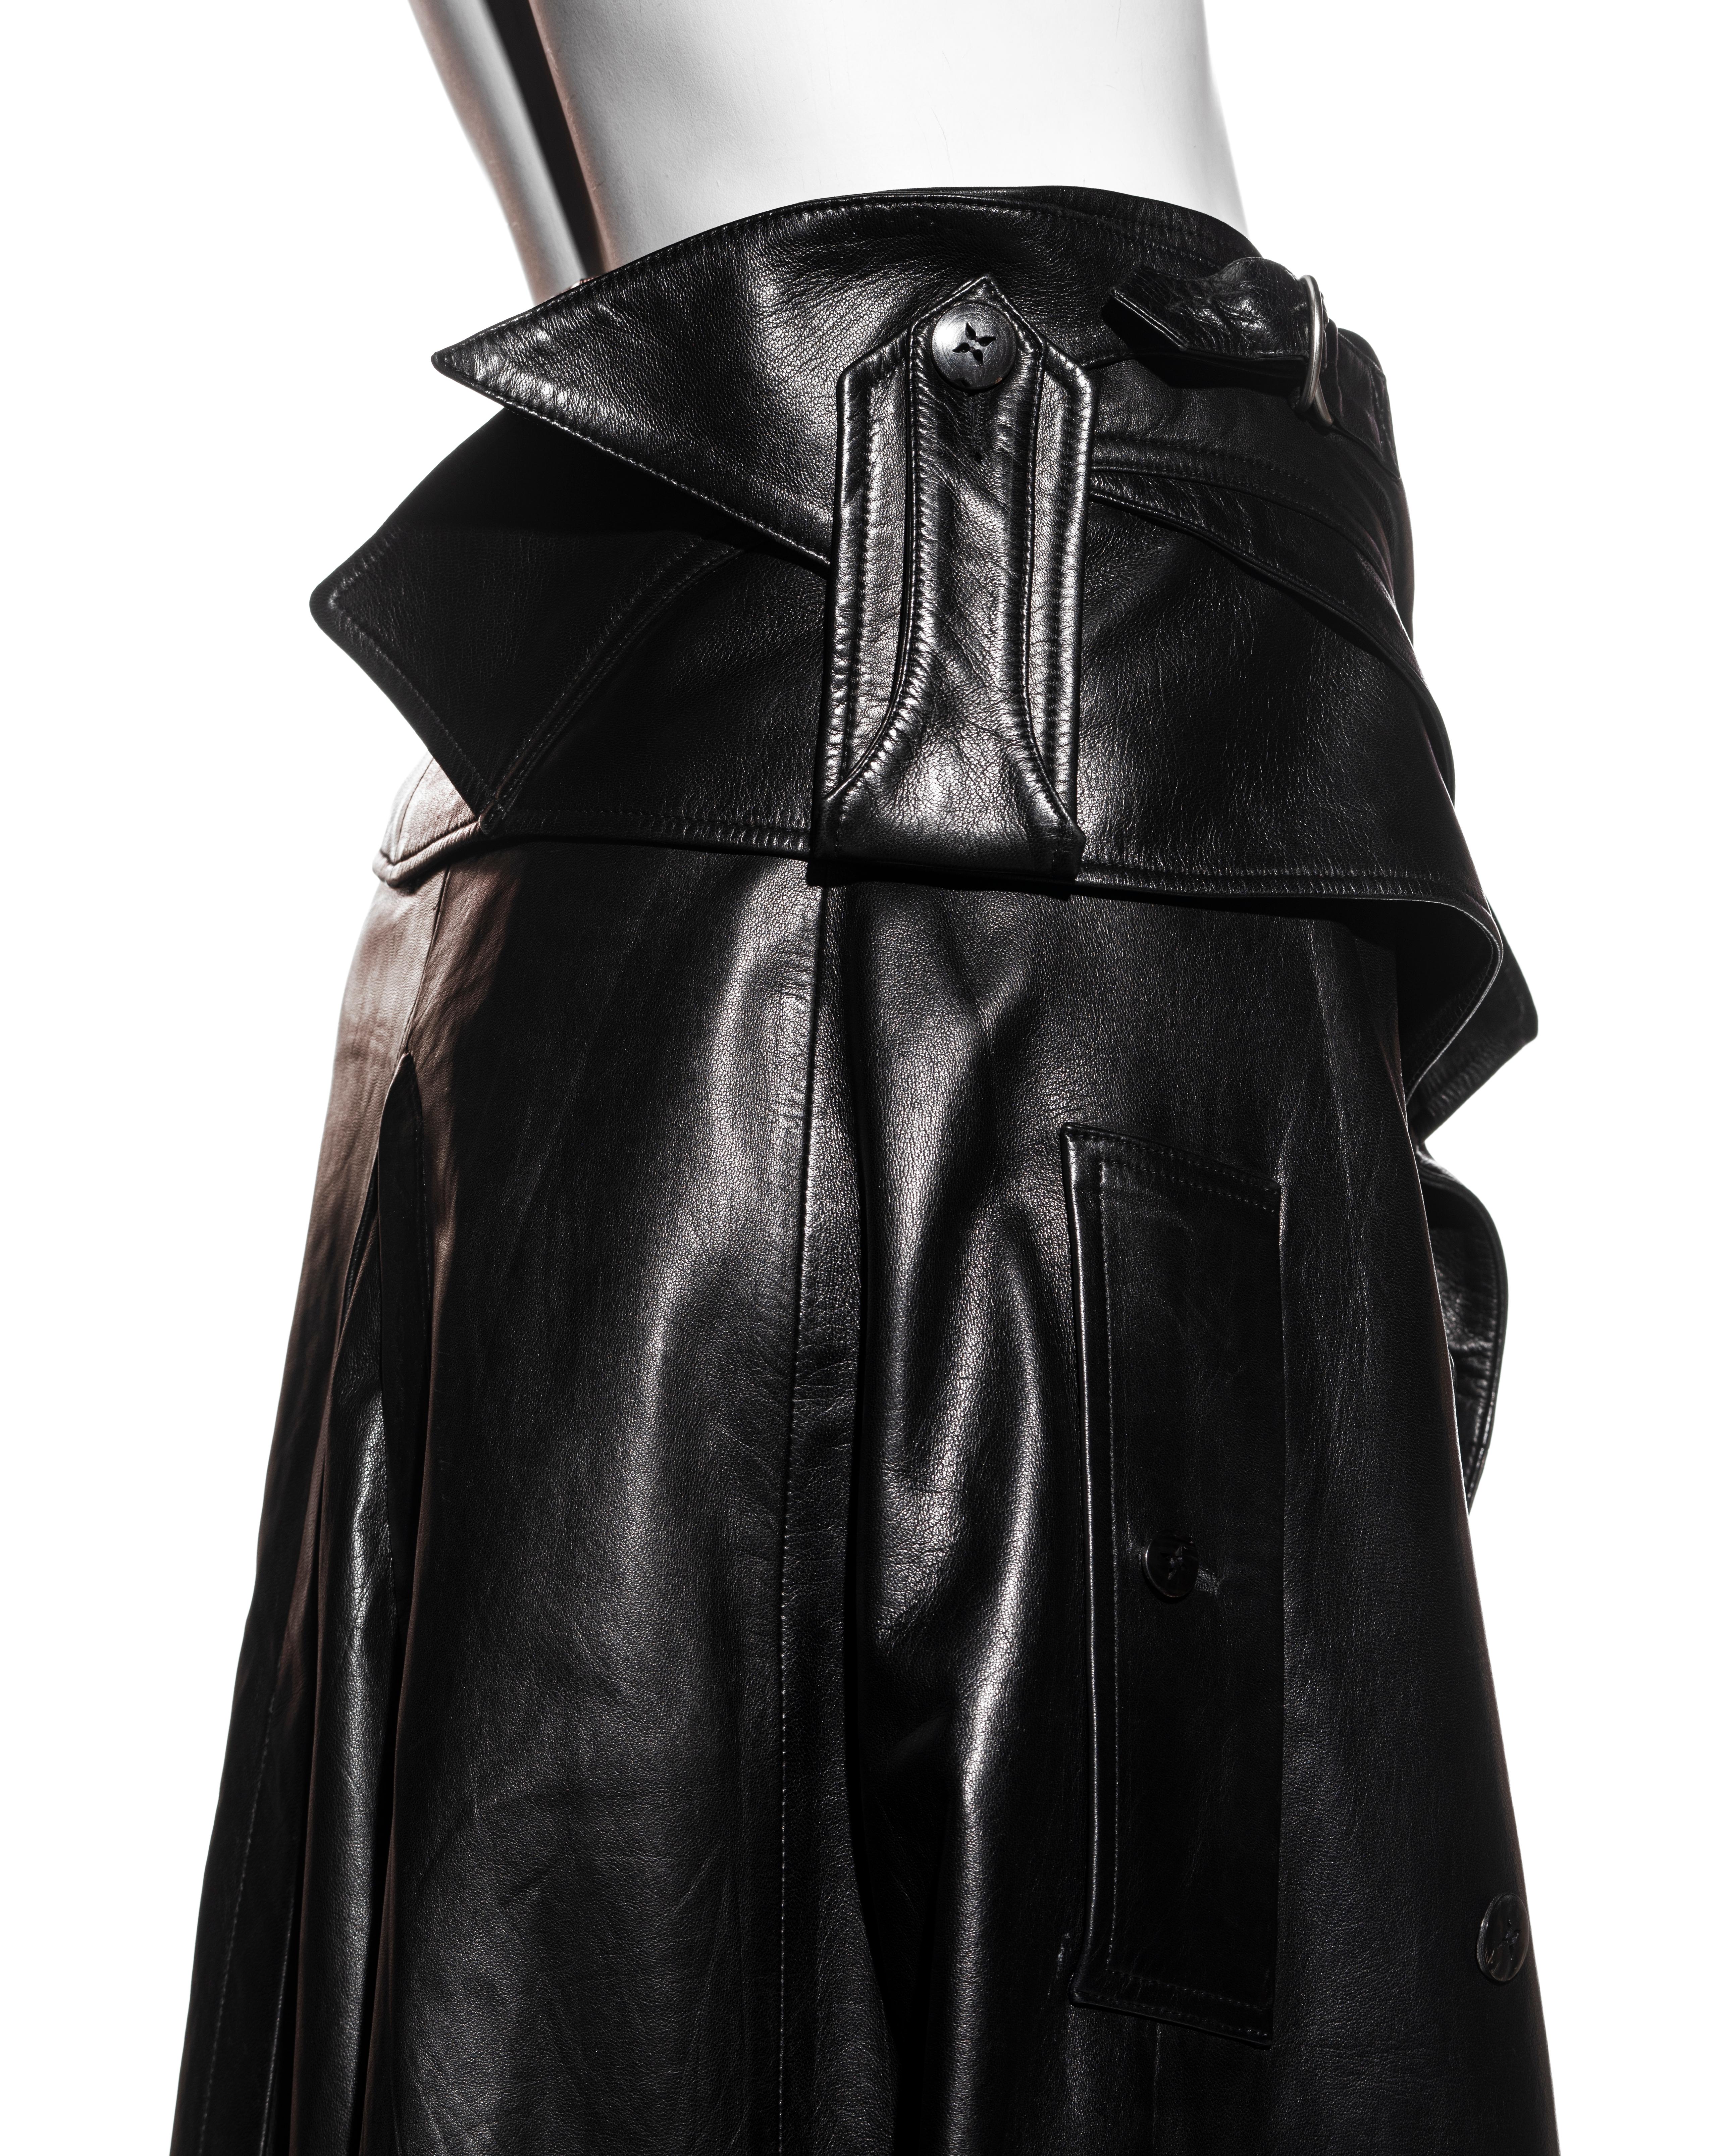 John Galliano black leather deconstructed wrap skirt, c. 2002 For Sale 1